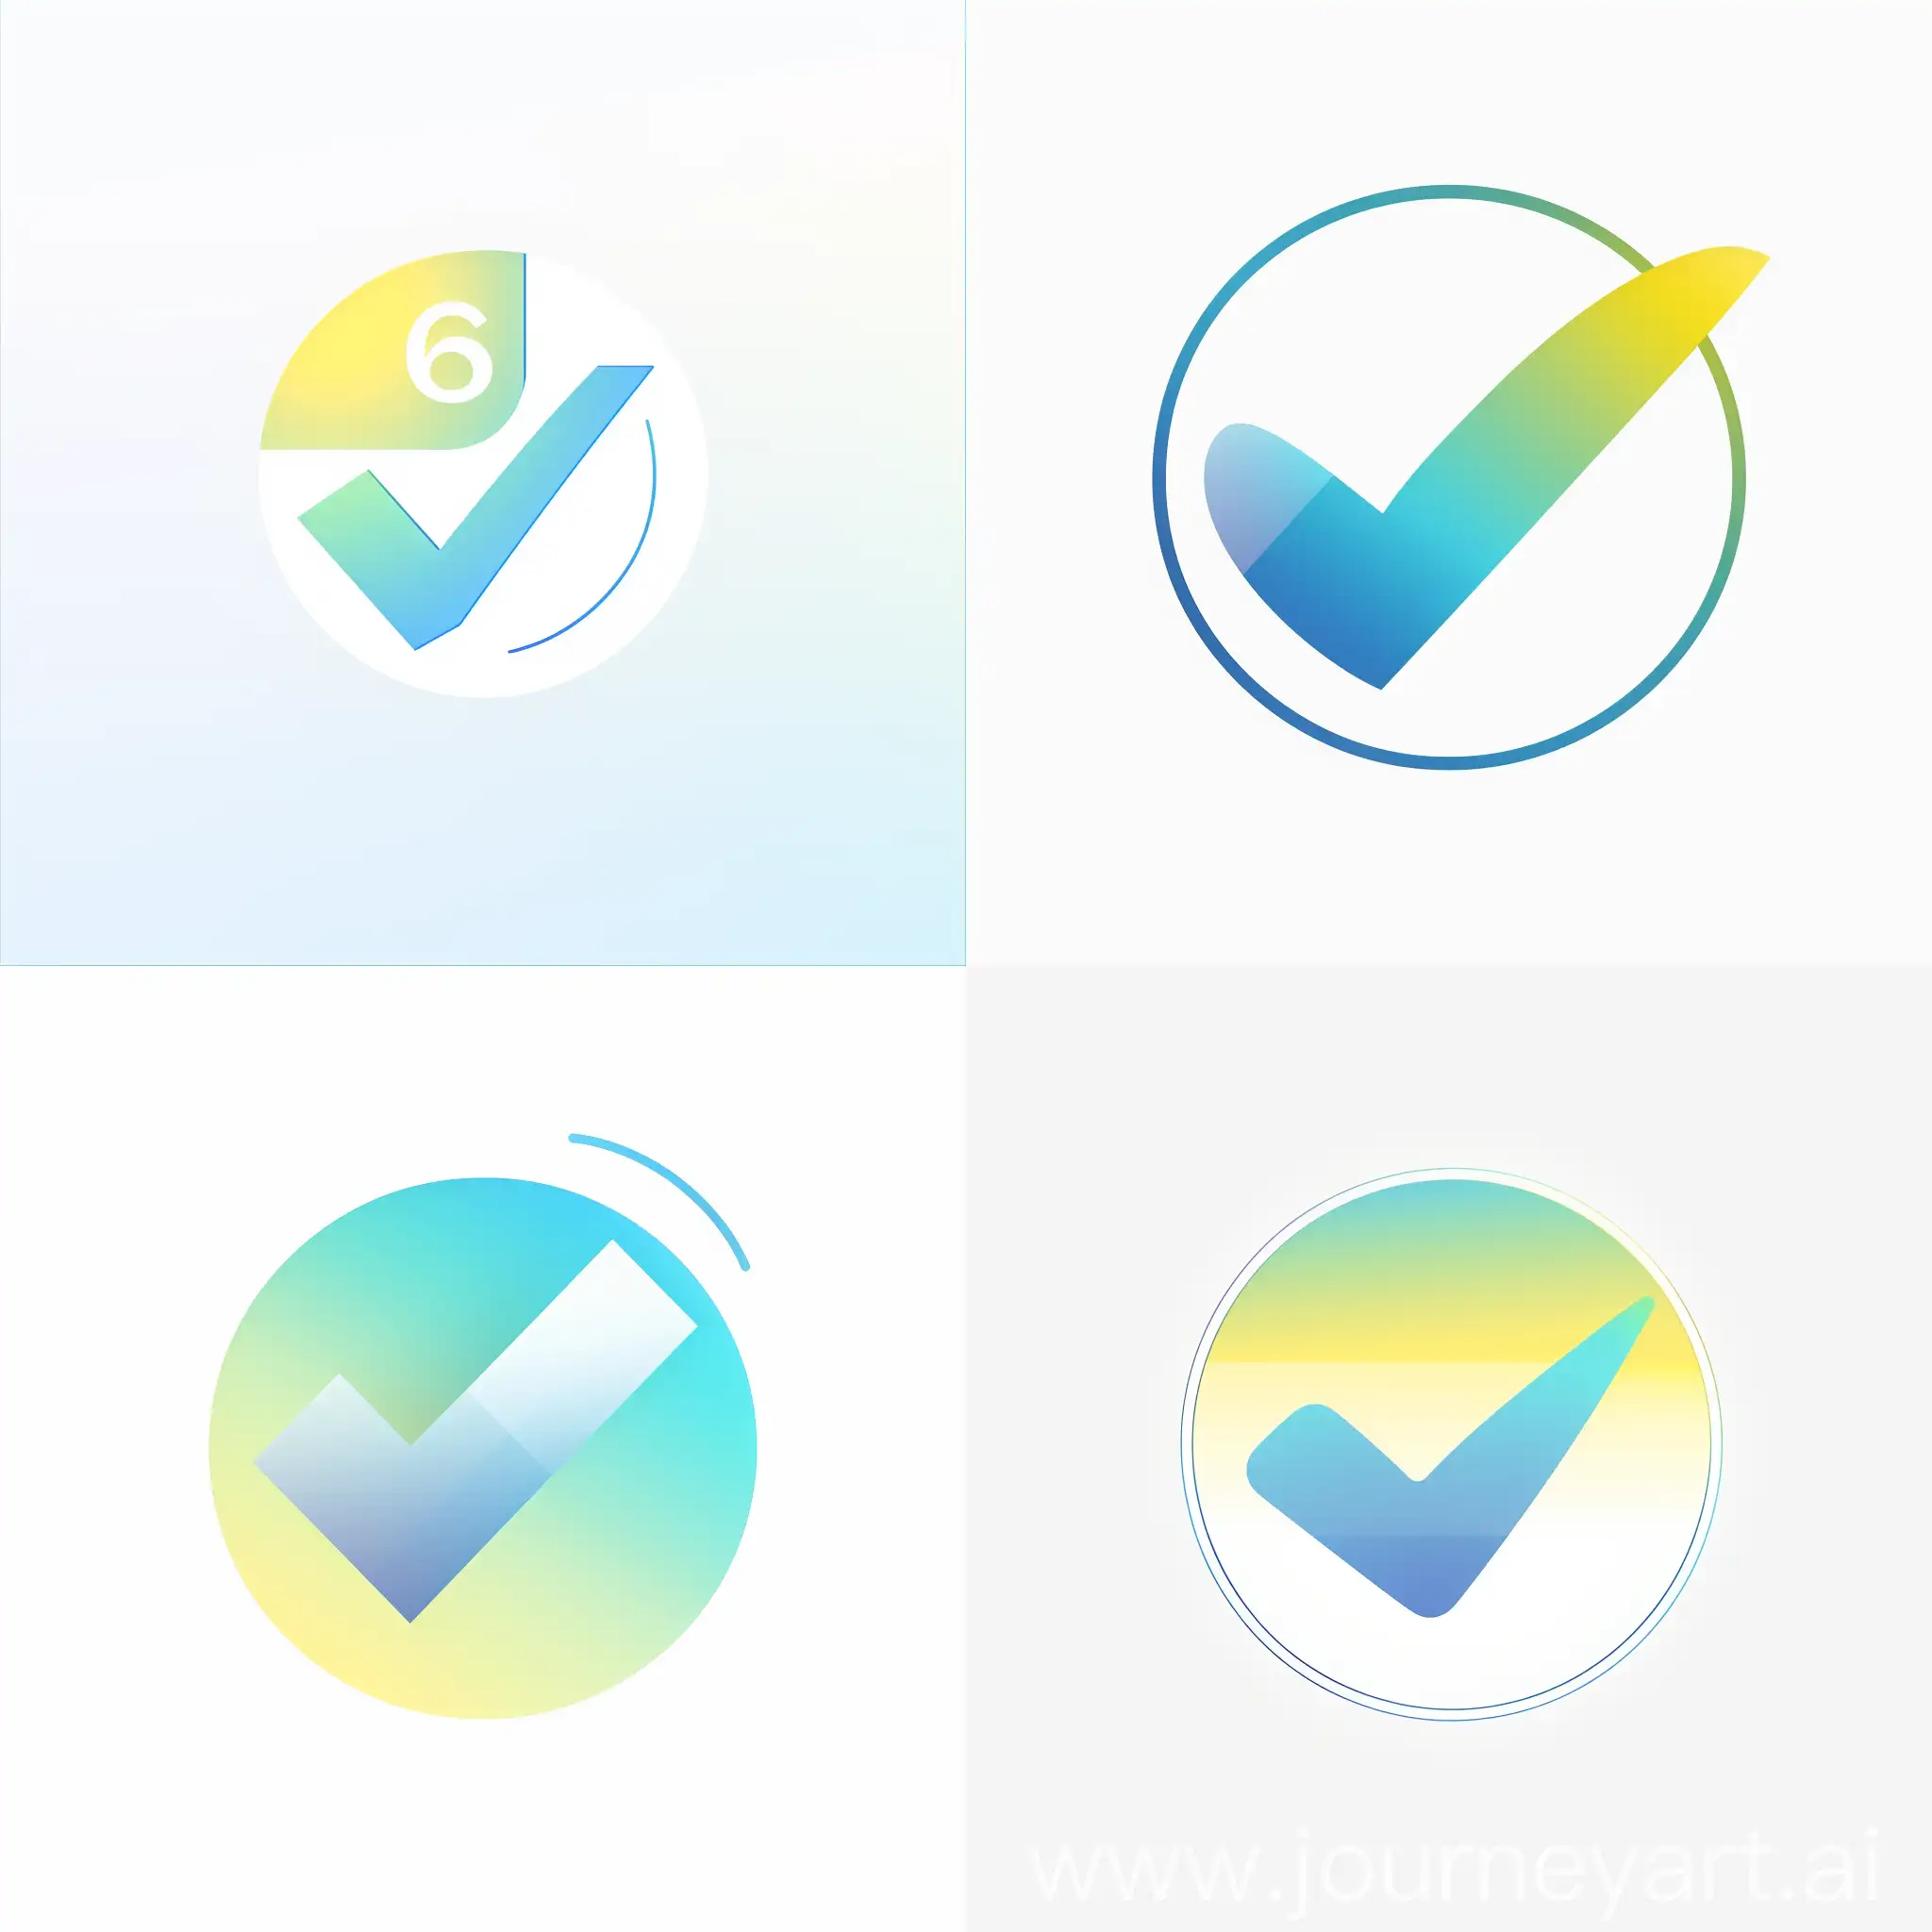 Design of geometric minimalistic logo of featuring a big check mark in blue green yellow gradient on a white background. Include circle as an additional design element. v6 --seed 126